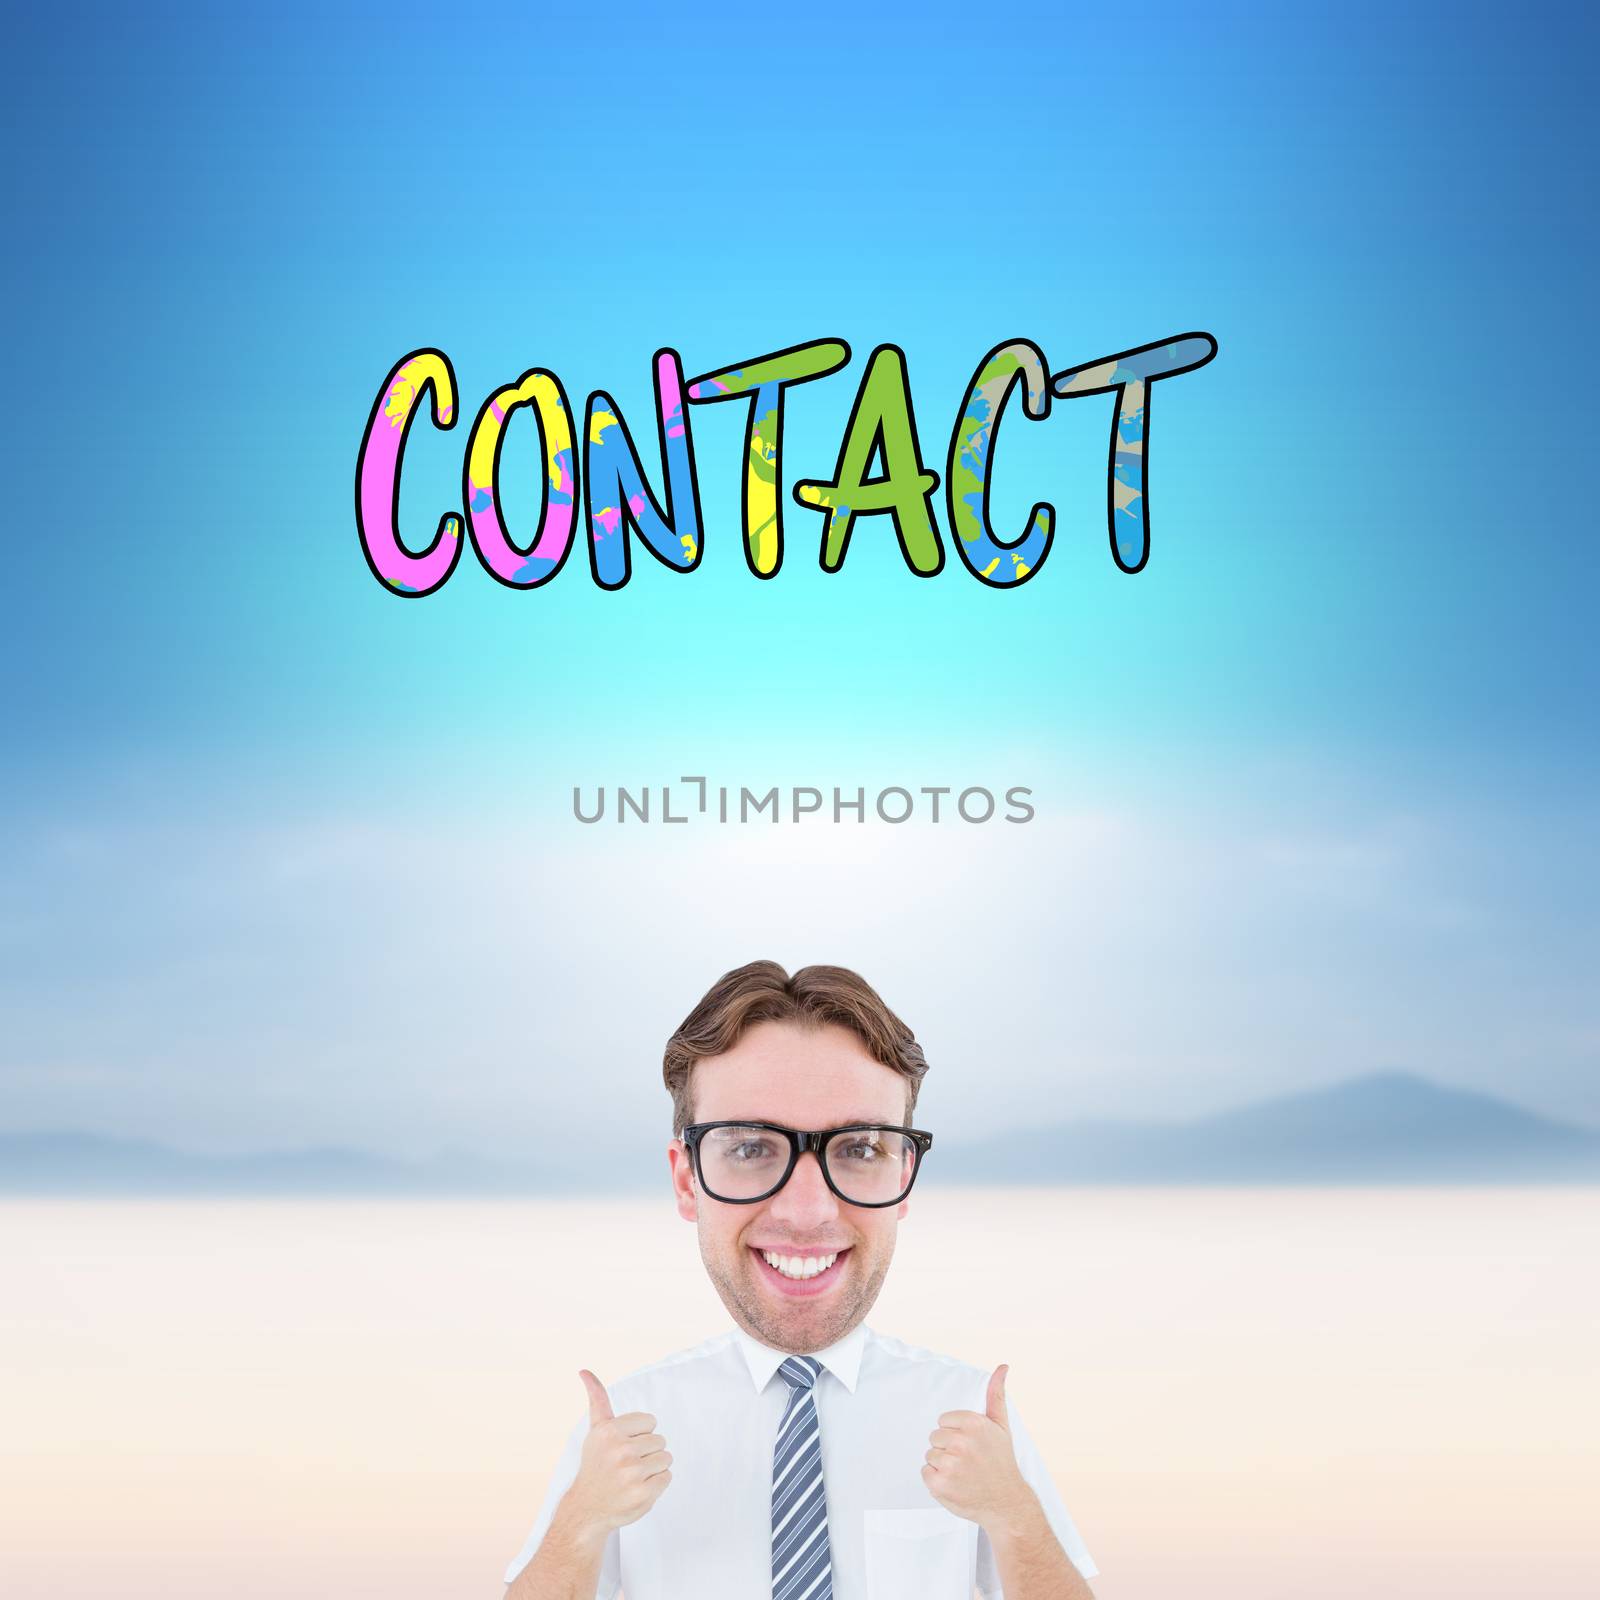 Composite image of geeky businessman with thumbs up by Wavebreakmedia